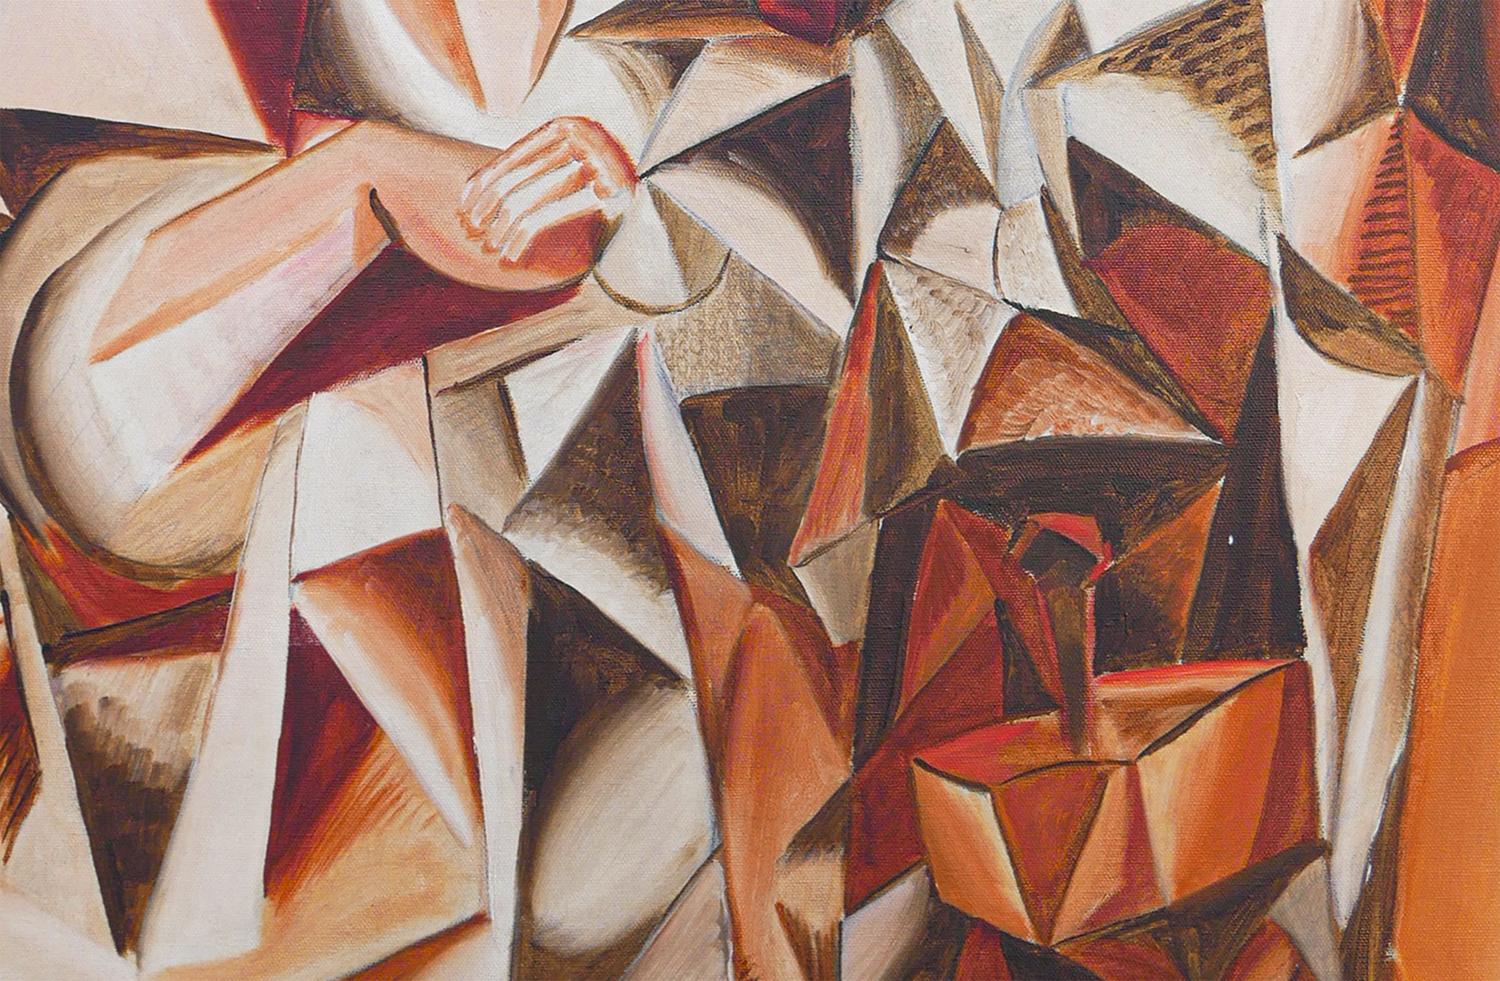 “Dienstag” Orange, Red, and Brown Abstract Cubist Figurative Painting 6